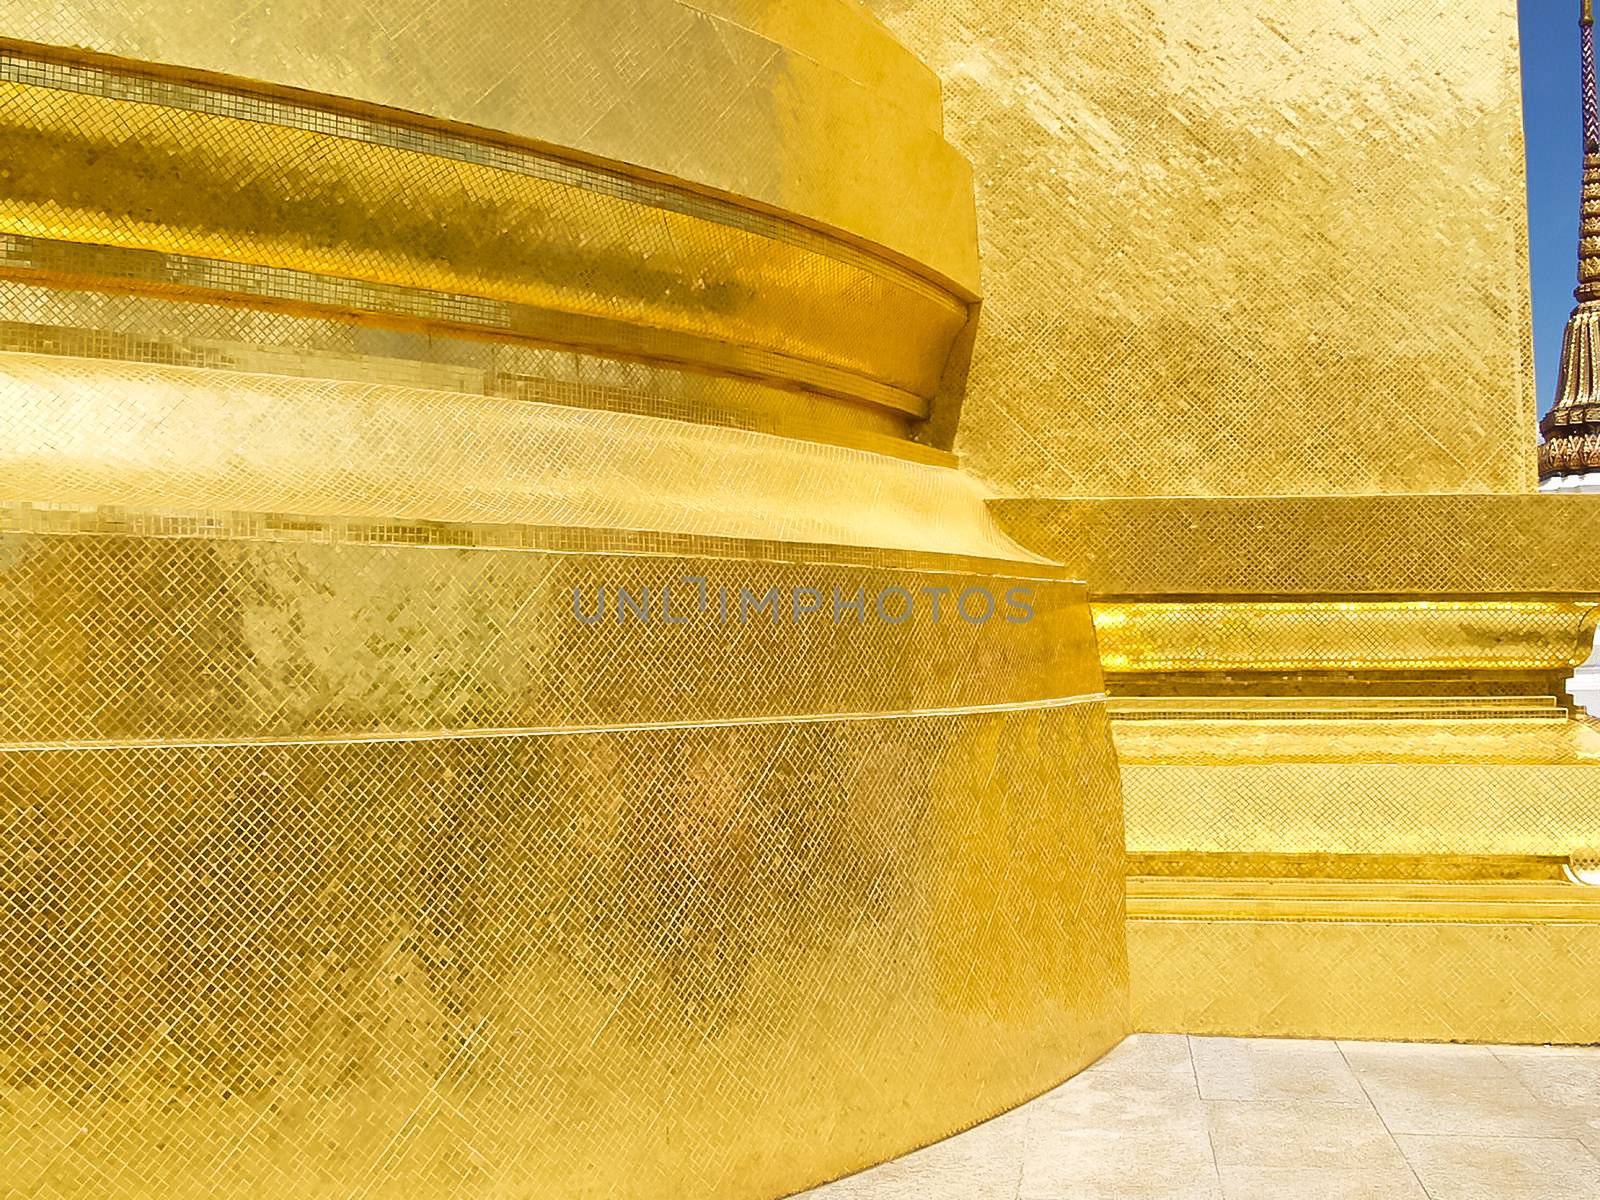 Golden pagoda inside emerald temple, thailand.  by NickNick